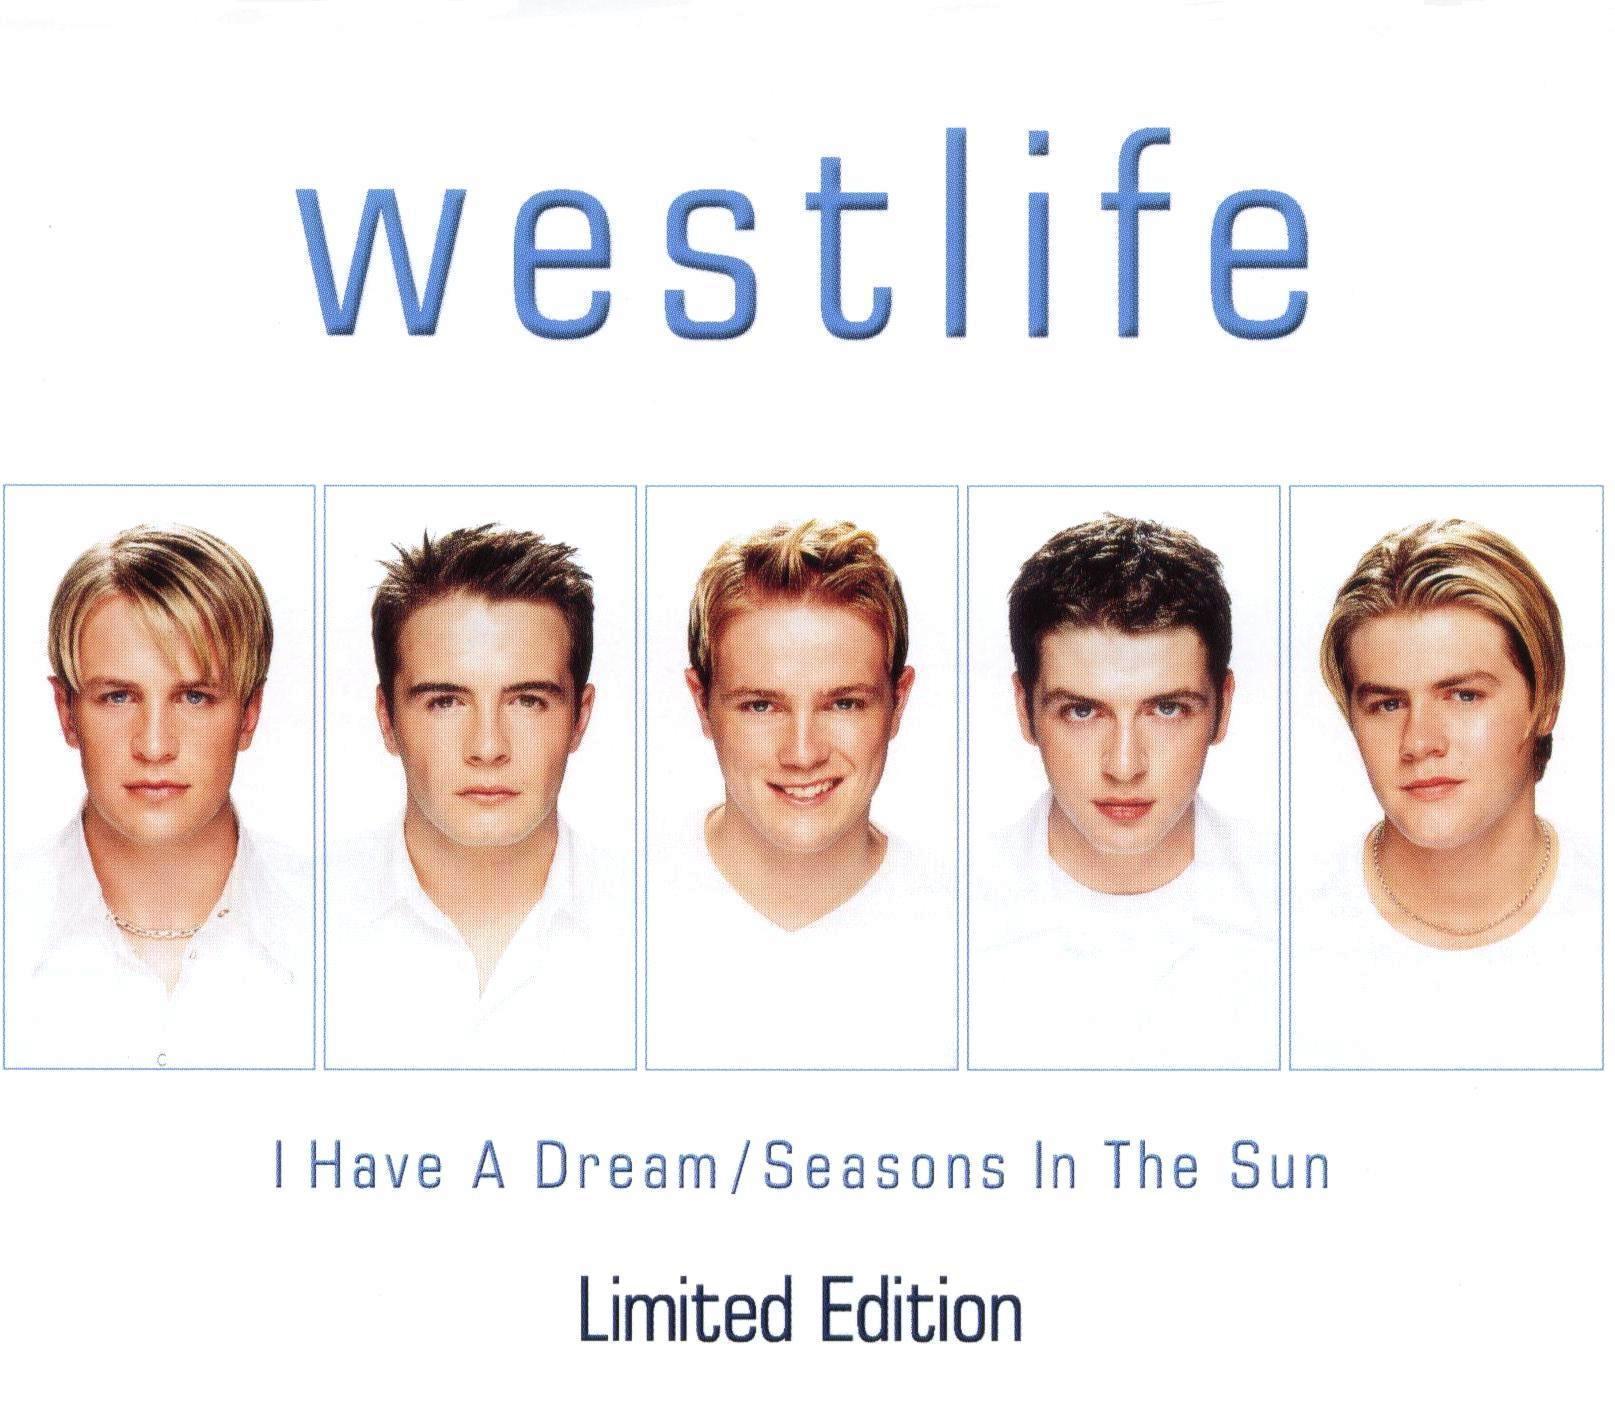 From ABBA to Westlife – I Have a Dream Continues Its Success